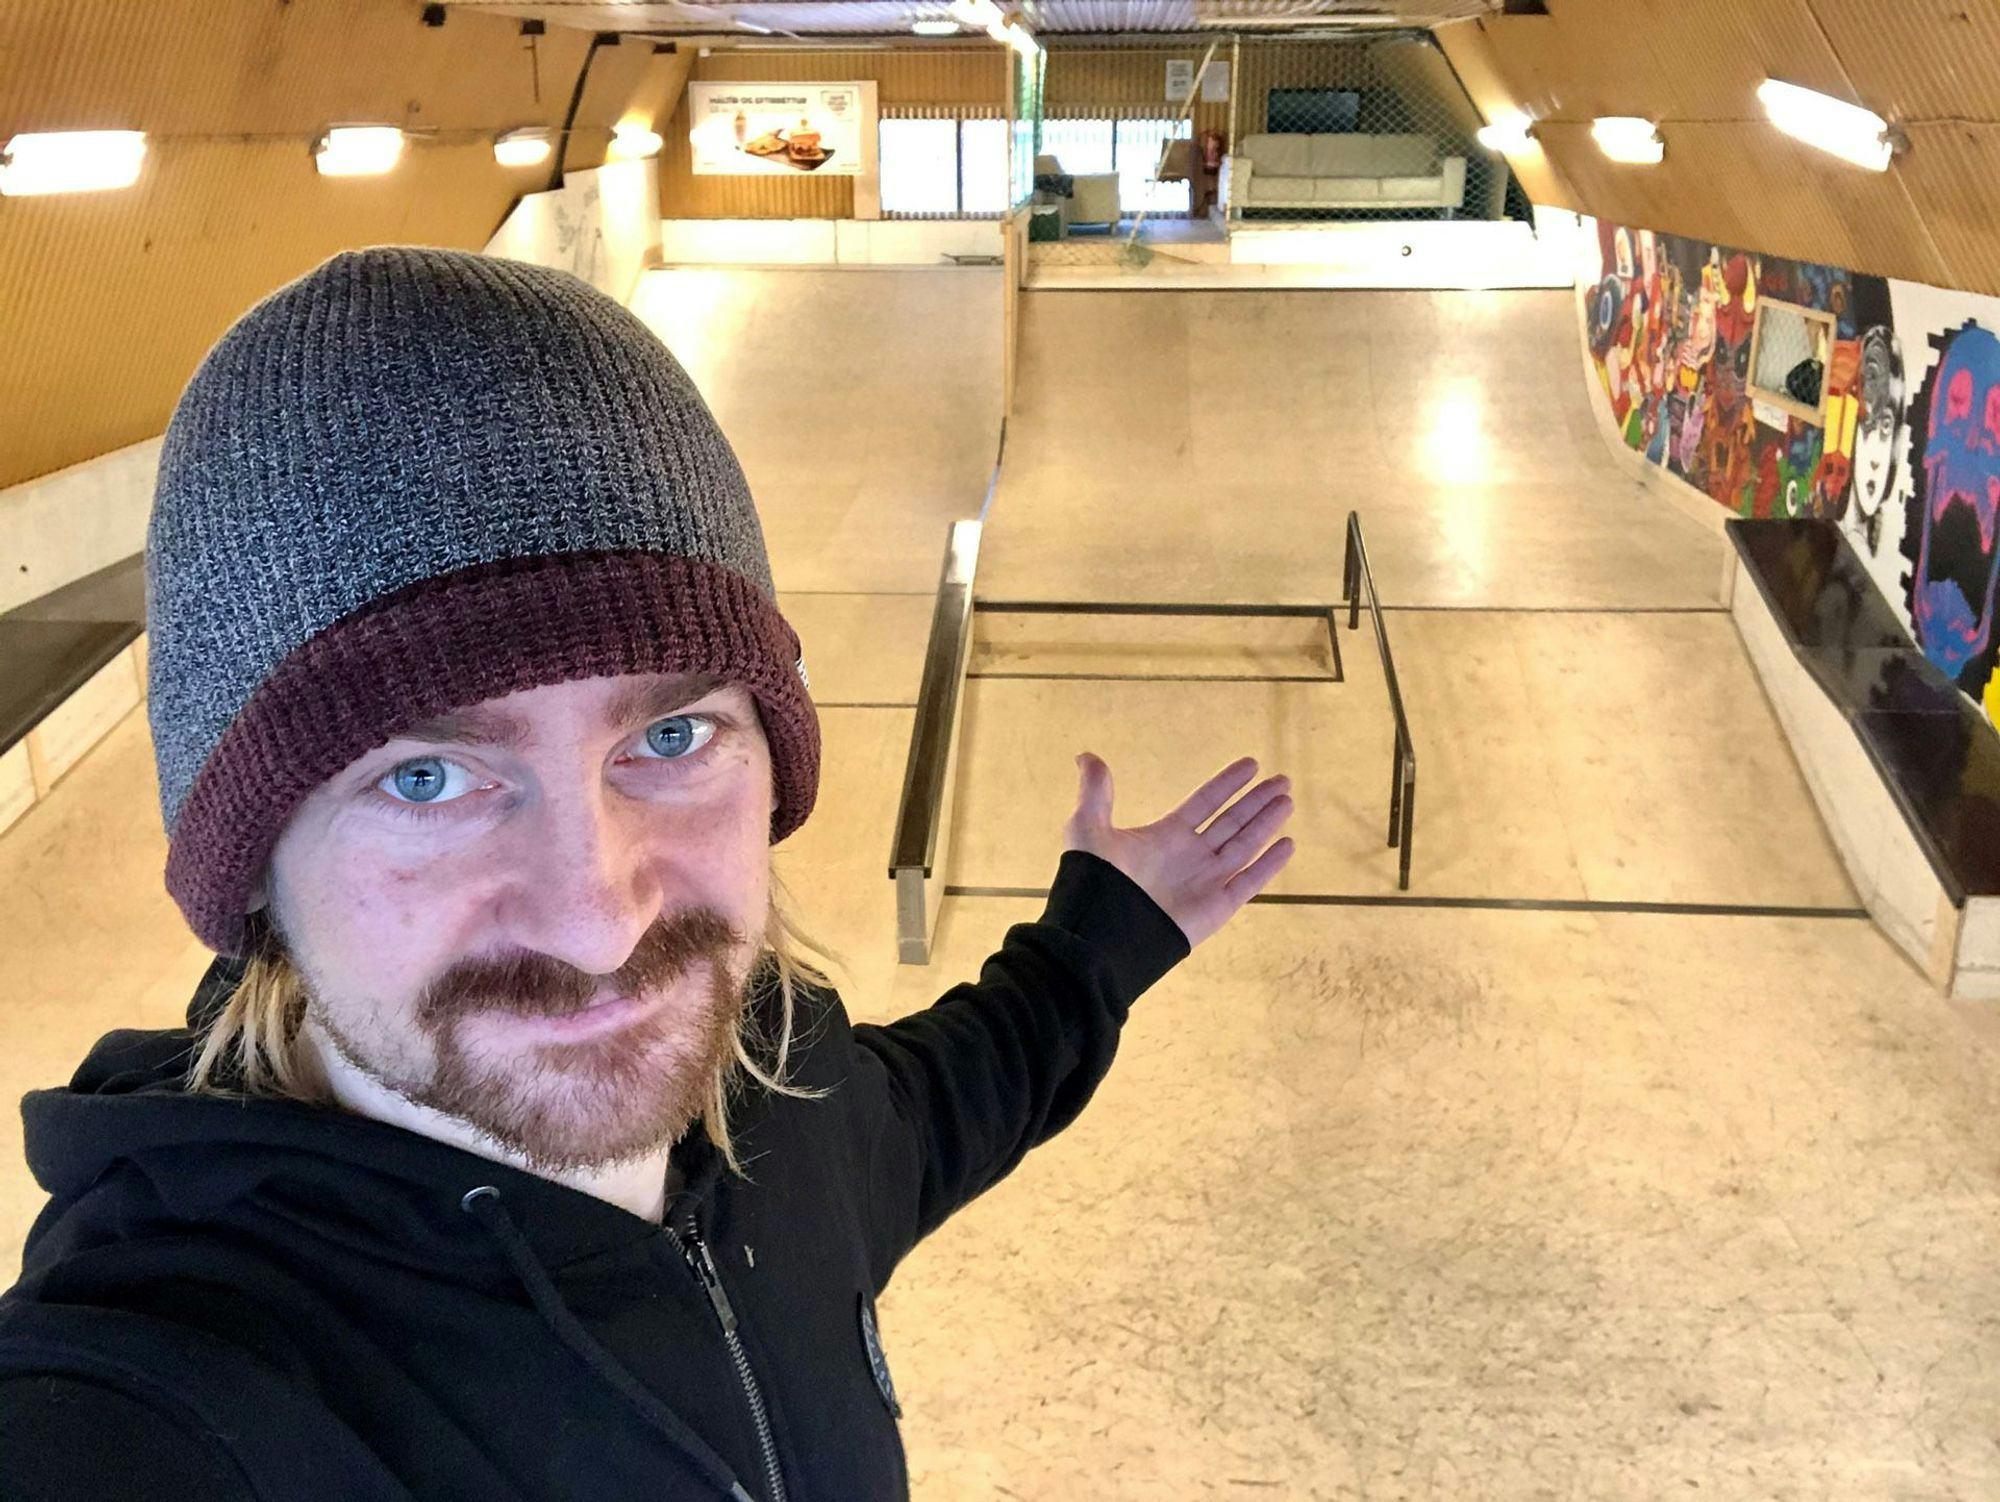 A man with beard and beanie with a hand gesture, in an indoor skatepark in the background